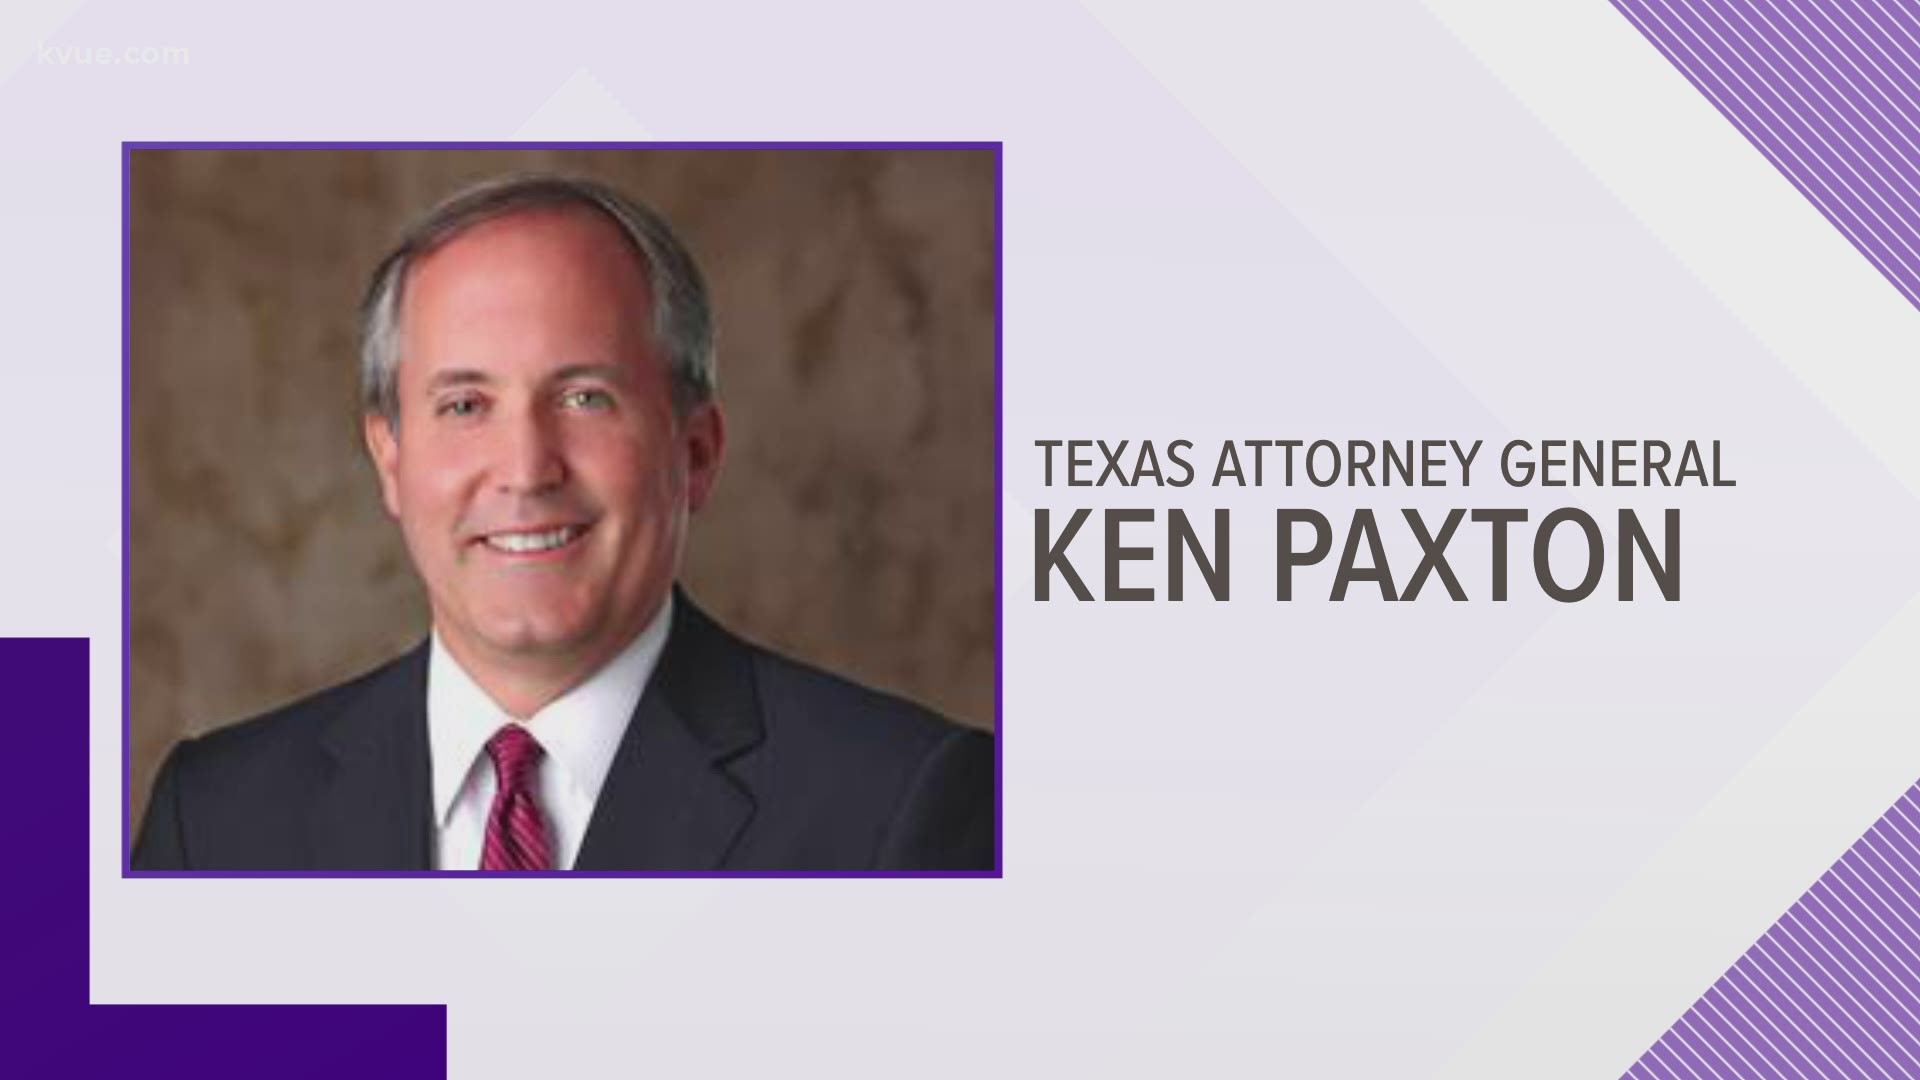 FBI agents have issued at least one federal subpoena for records from the Texas Attorney General's Office in an ongoing investigation against Ken Paxton.